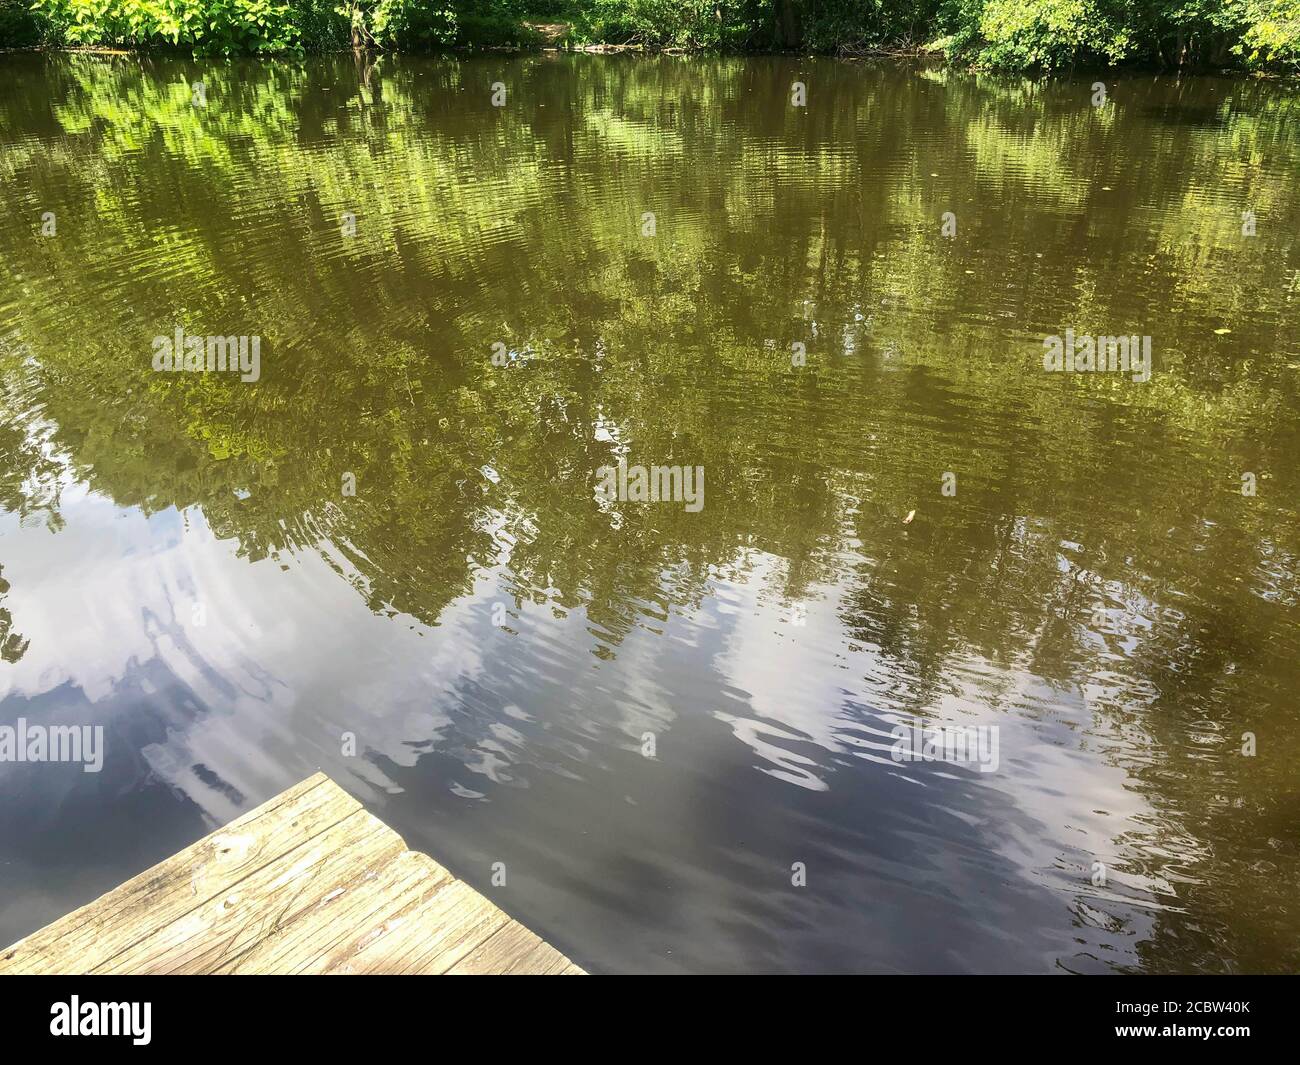 Trees, sky and clouds are reflected in this full frame image of a forest pond. Dock in foreground and woodland surrounding the background. Stock Photo